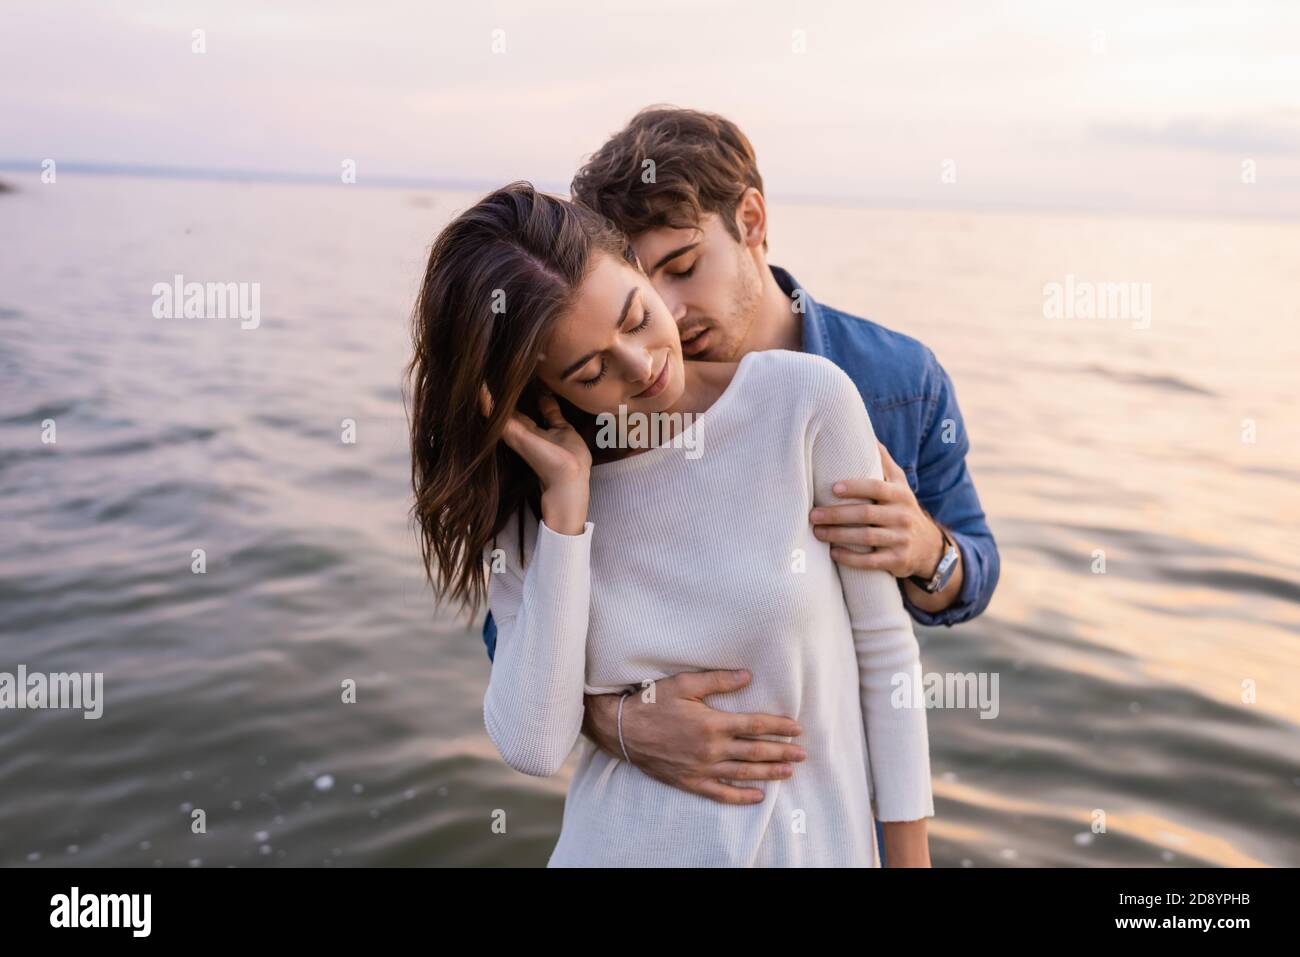 The Young Girl Embrace The Guy For A Neck, And He Embraces Her For A Waist.  Stock Photo, Picture and Royalty Free Image. Image 78052704.